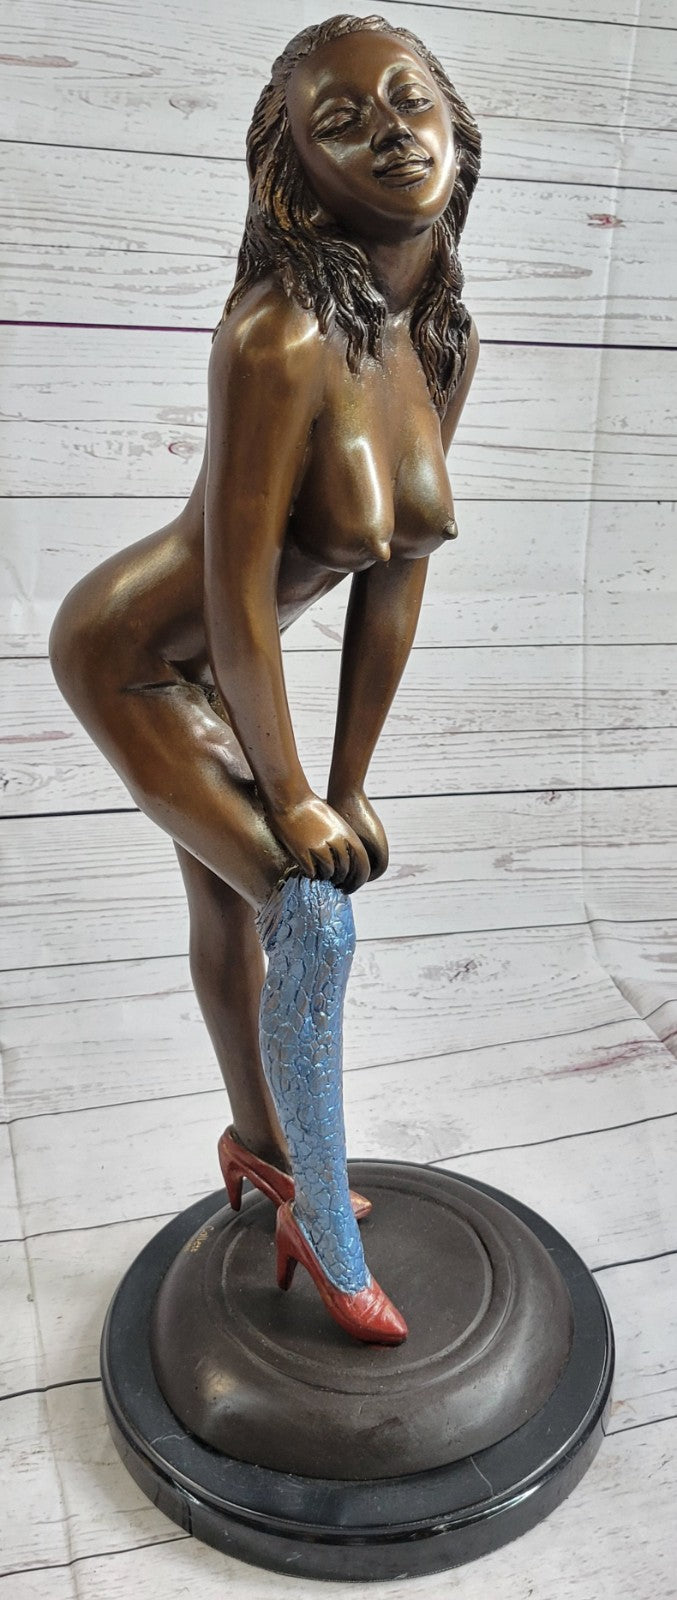 Handcrafted bronze sculpture SALE Bas Marble Tall 23" Collett Female Nude Large